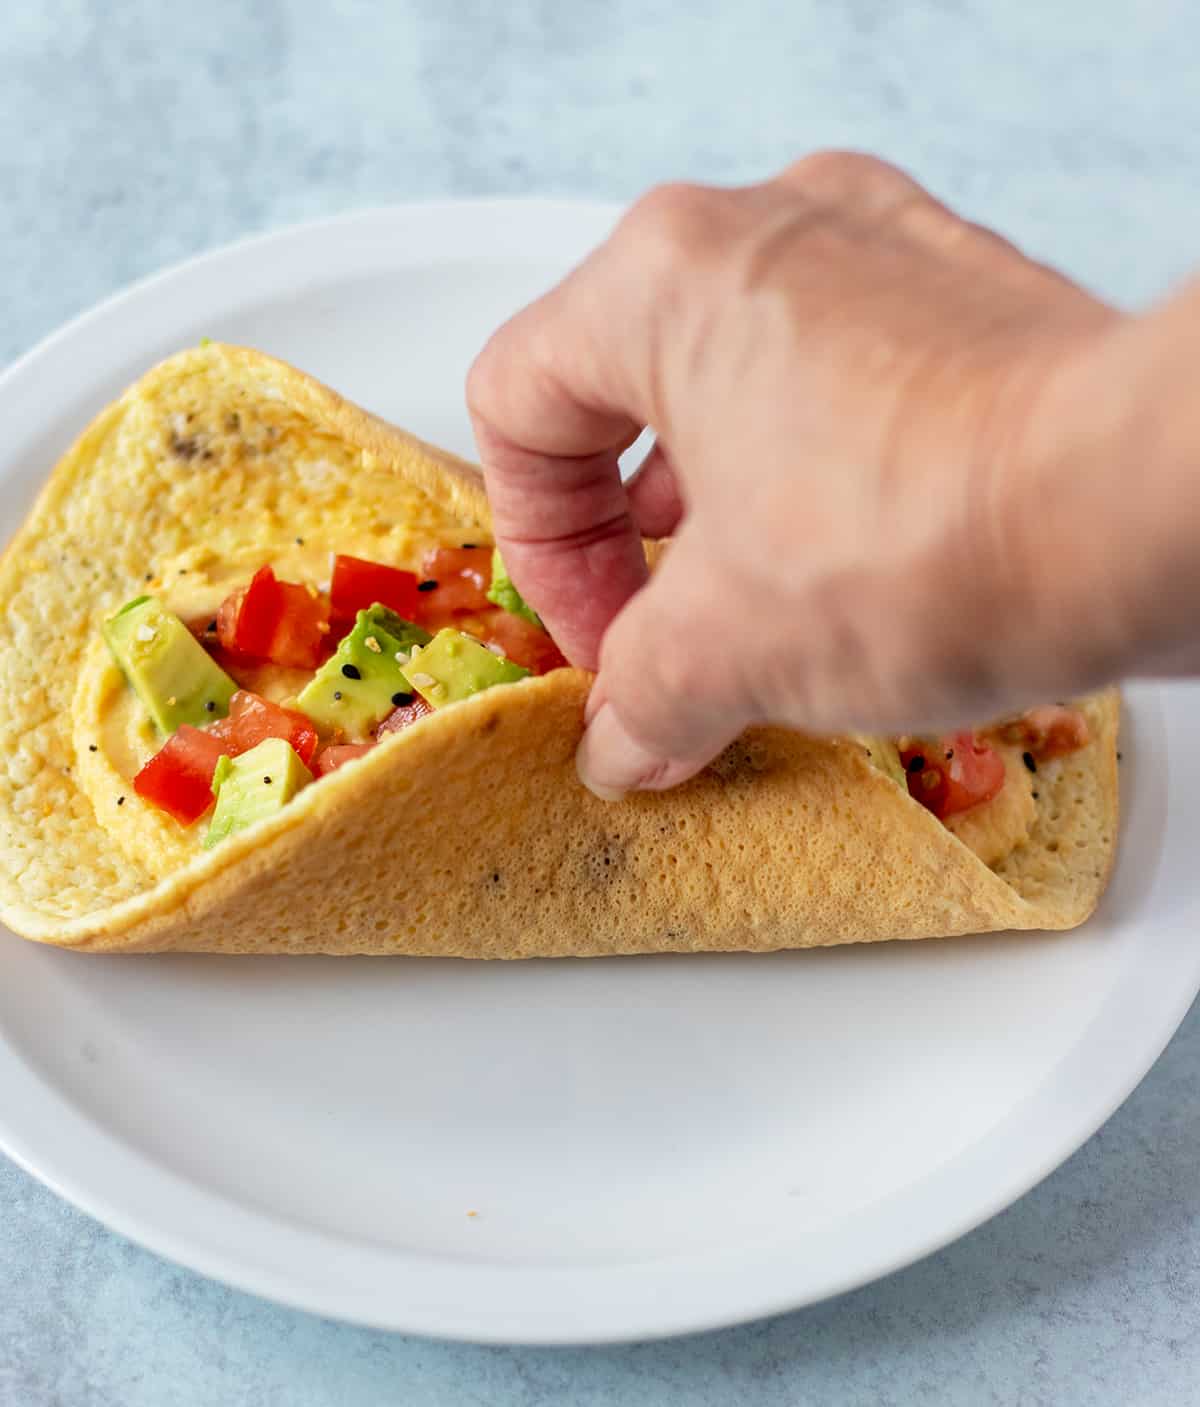 Egg wraps topped with hummus, avocado and tomatoes